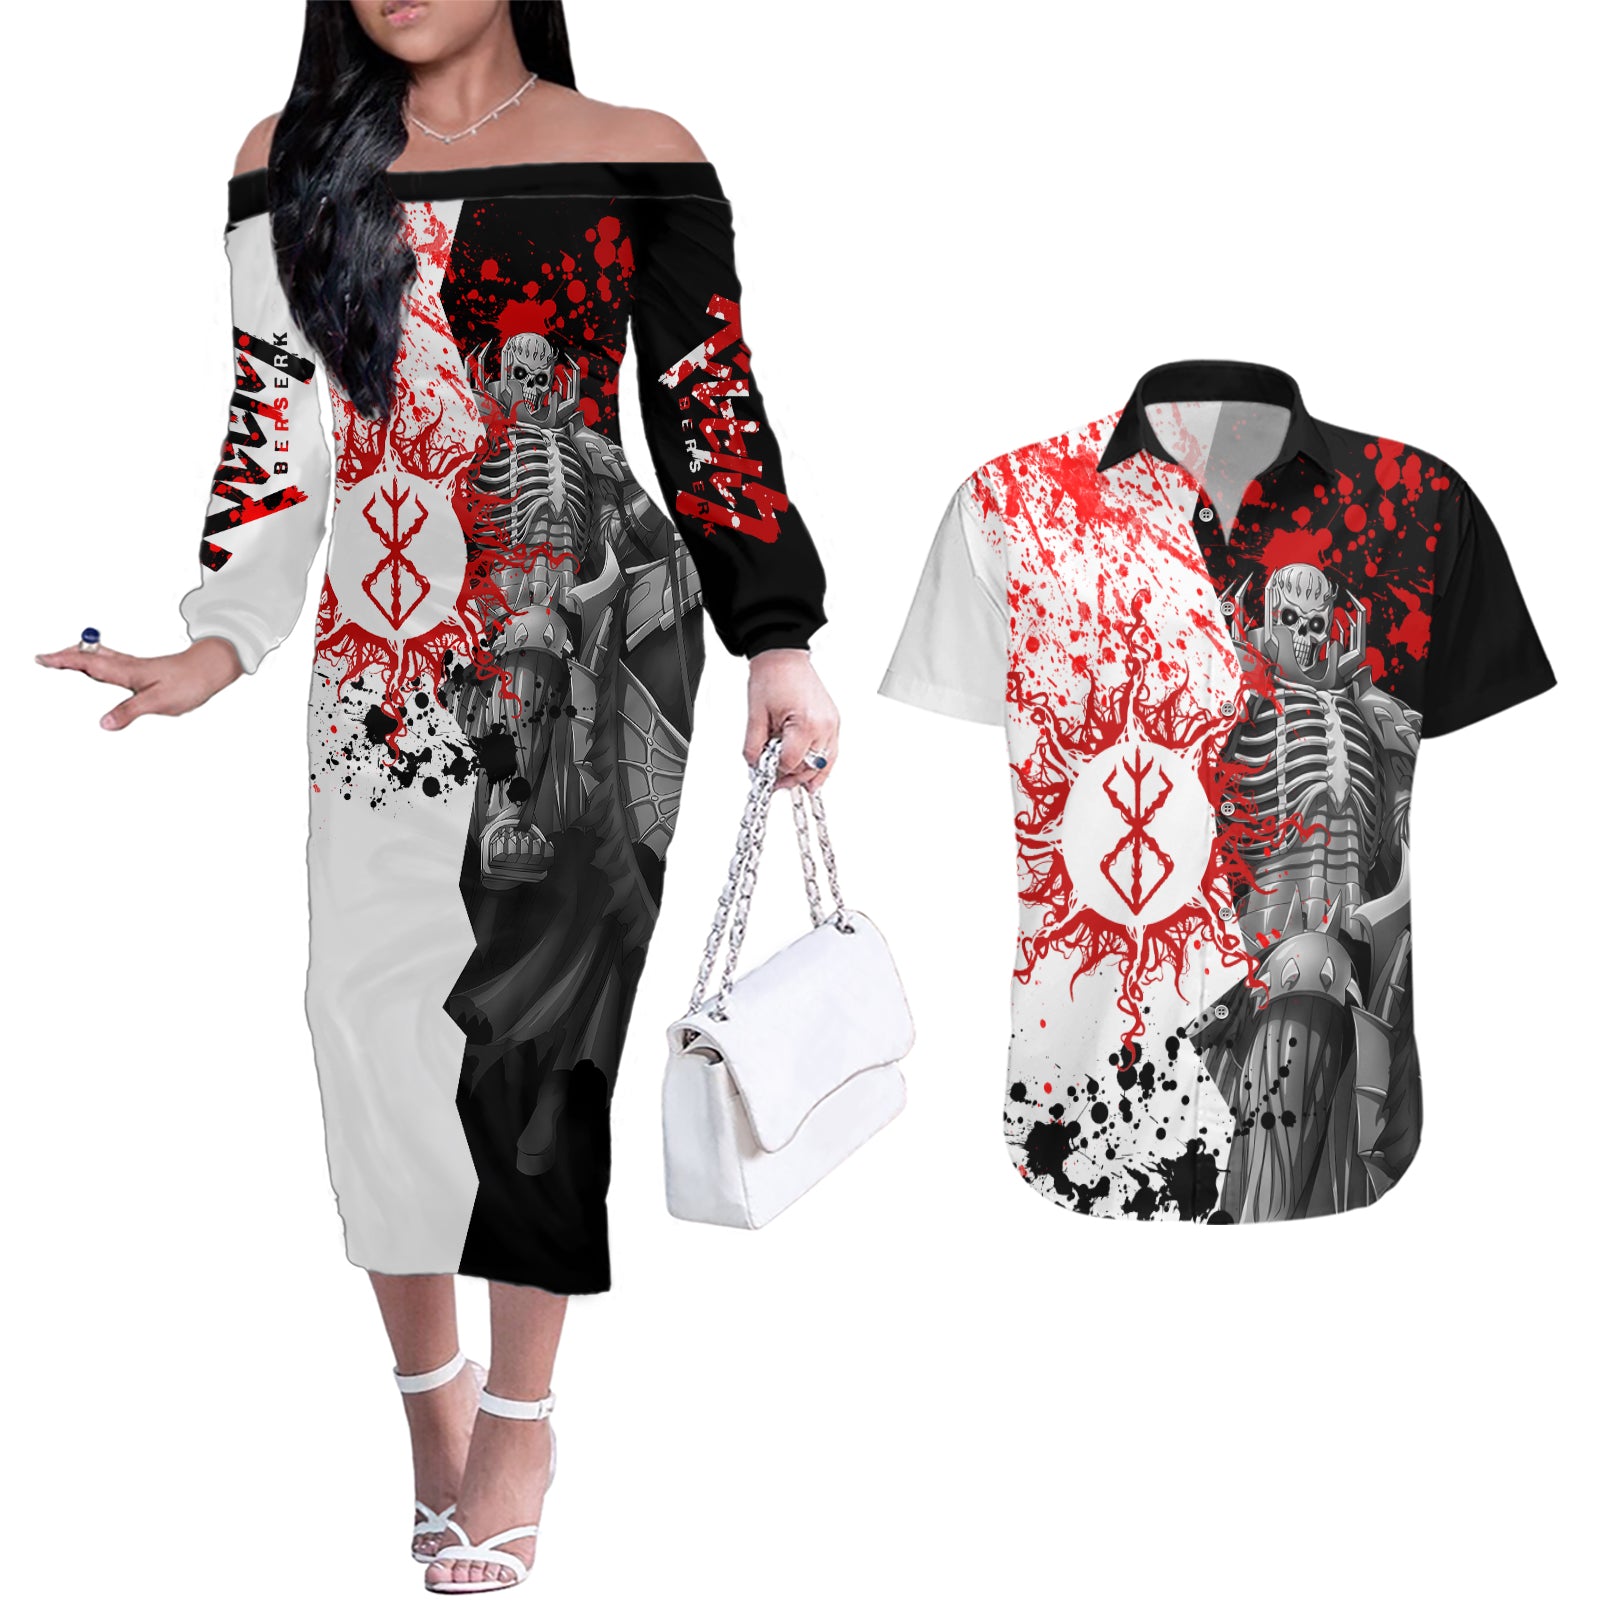 The Skull Knight Berserk Couples Matching Off The Shoulder Long Sleeve Dress and Hawaiian Shirt Anime Japan Style